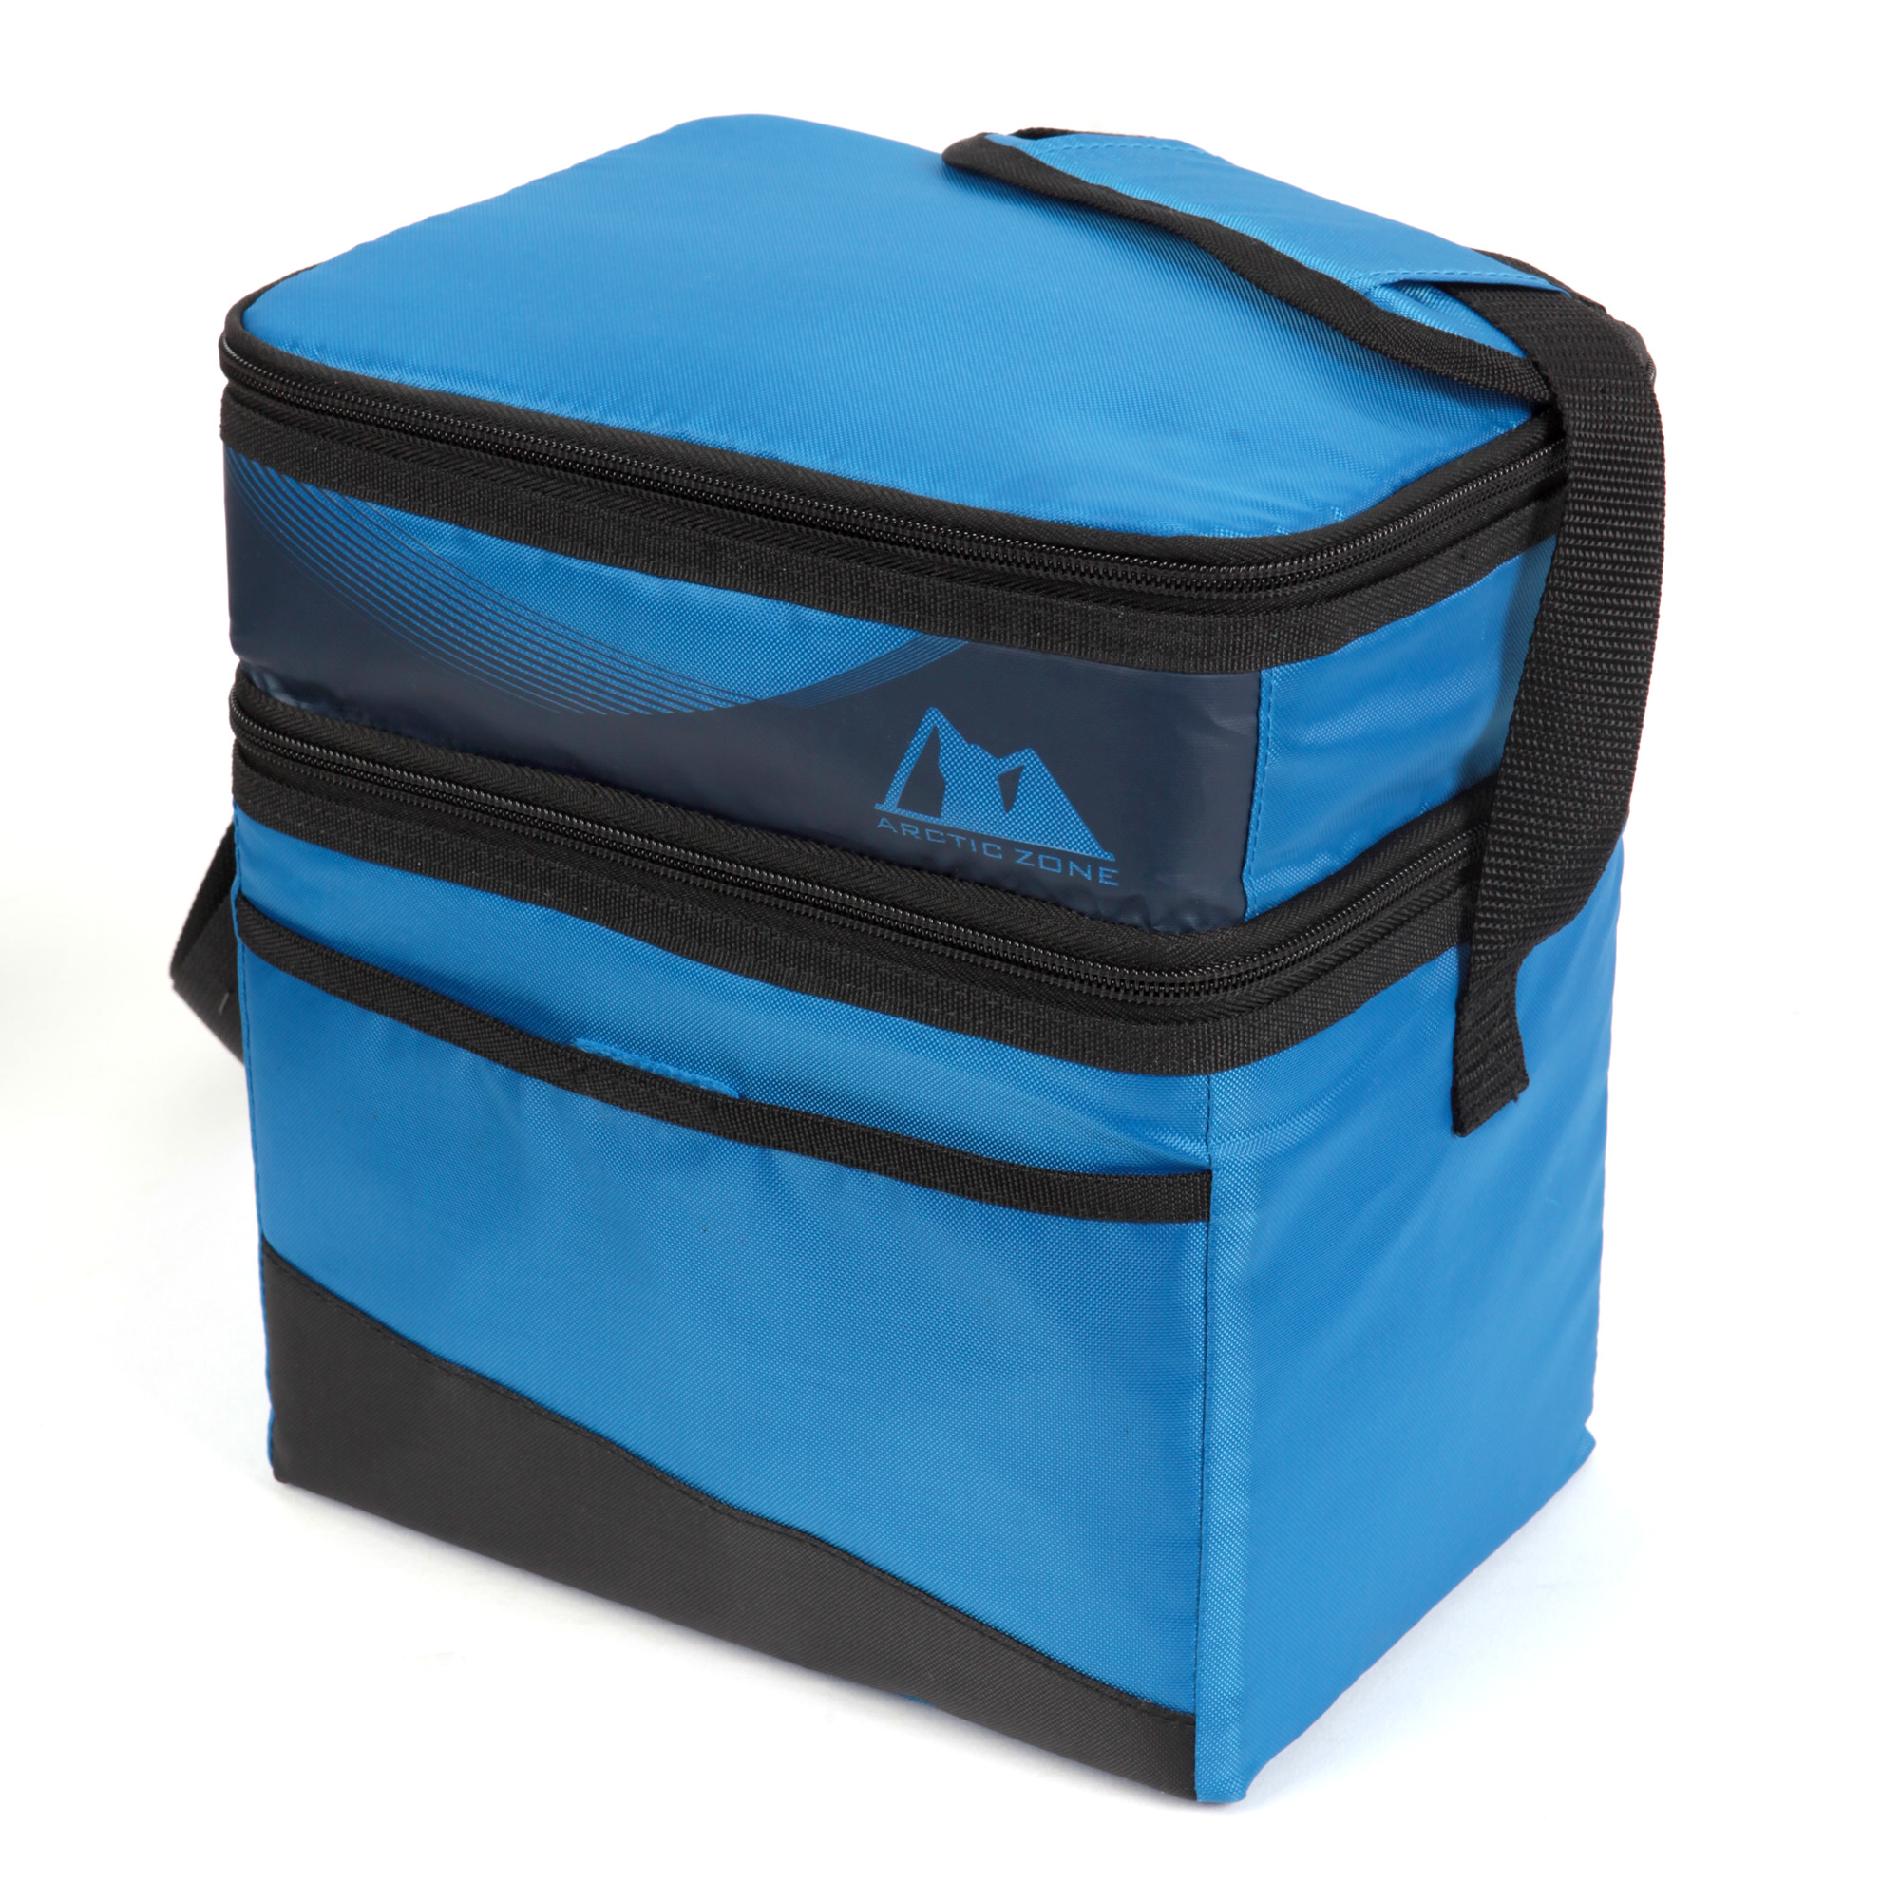 California Innovations Arctic Zone Dual Compartment Lunch Box